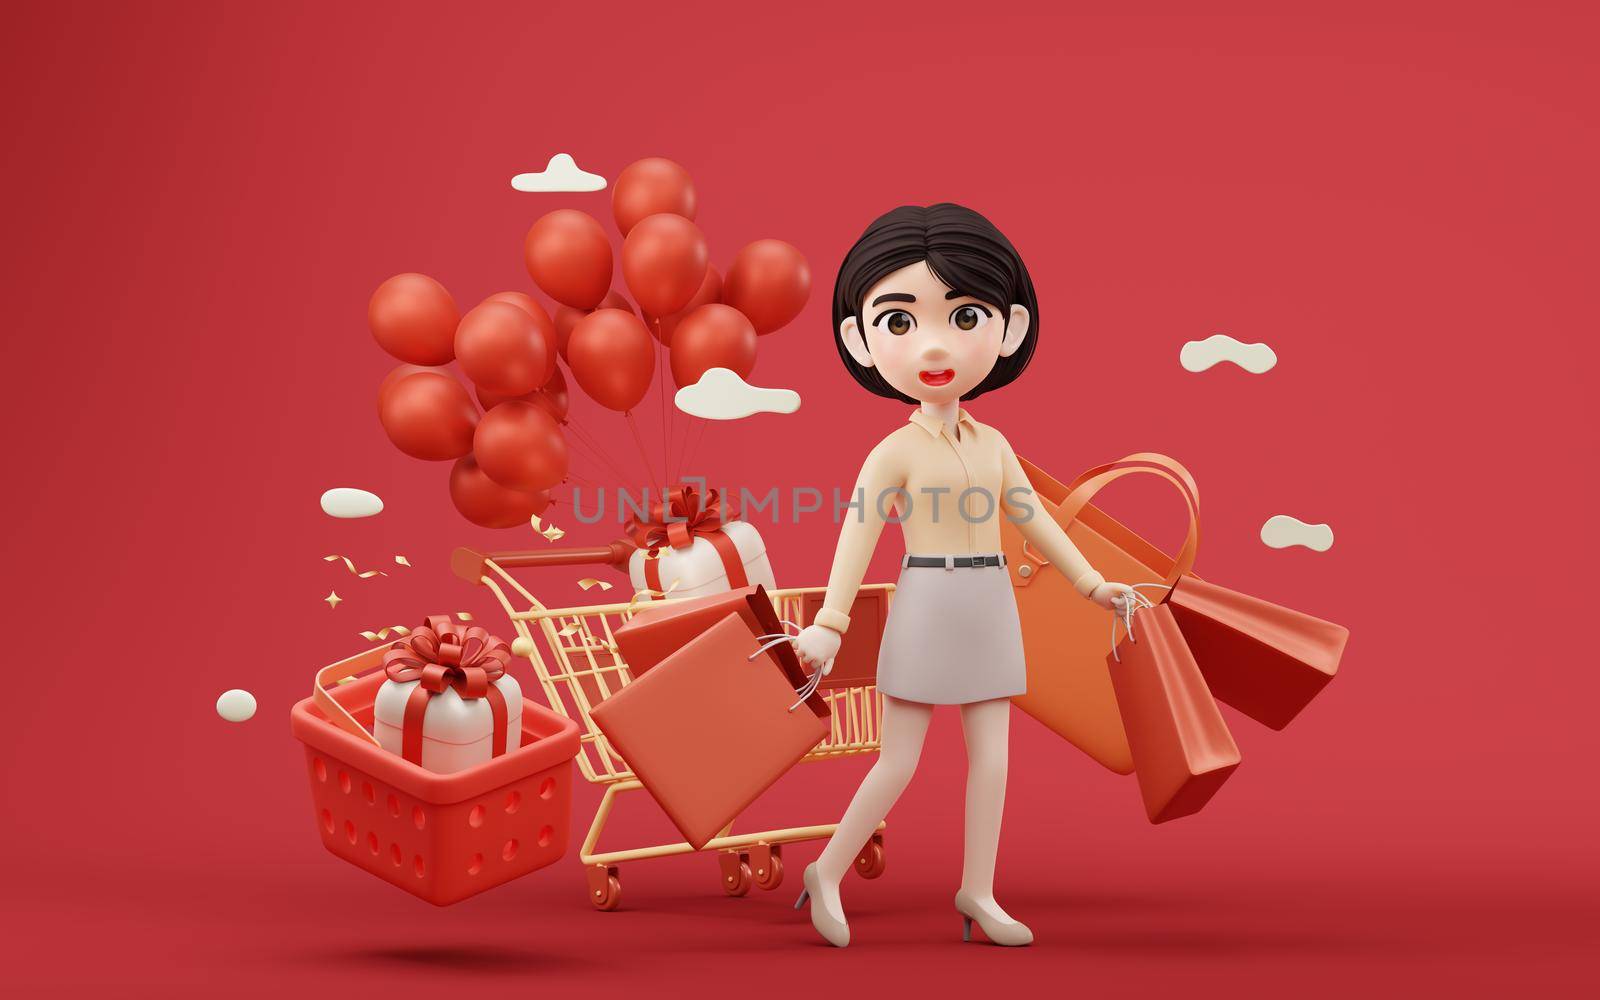 Cartoon girl with shopping cart, 3d rendering. by vinkfan